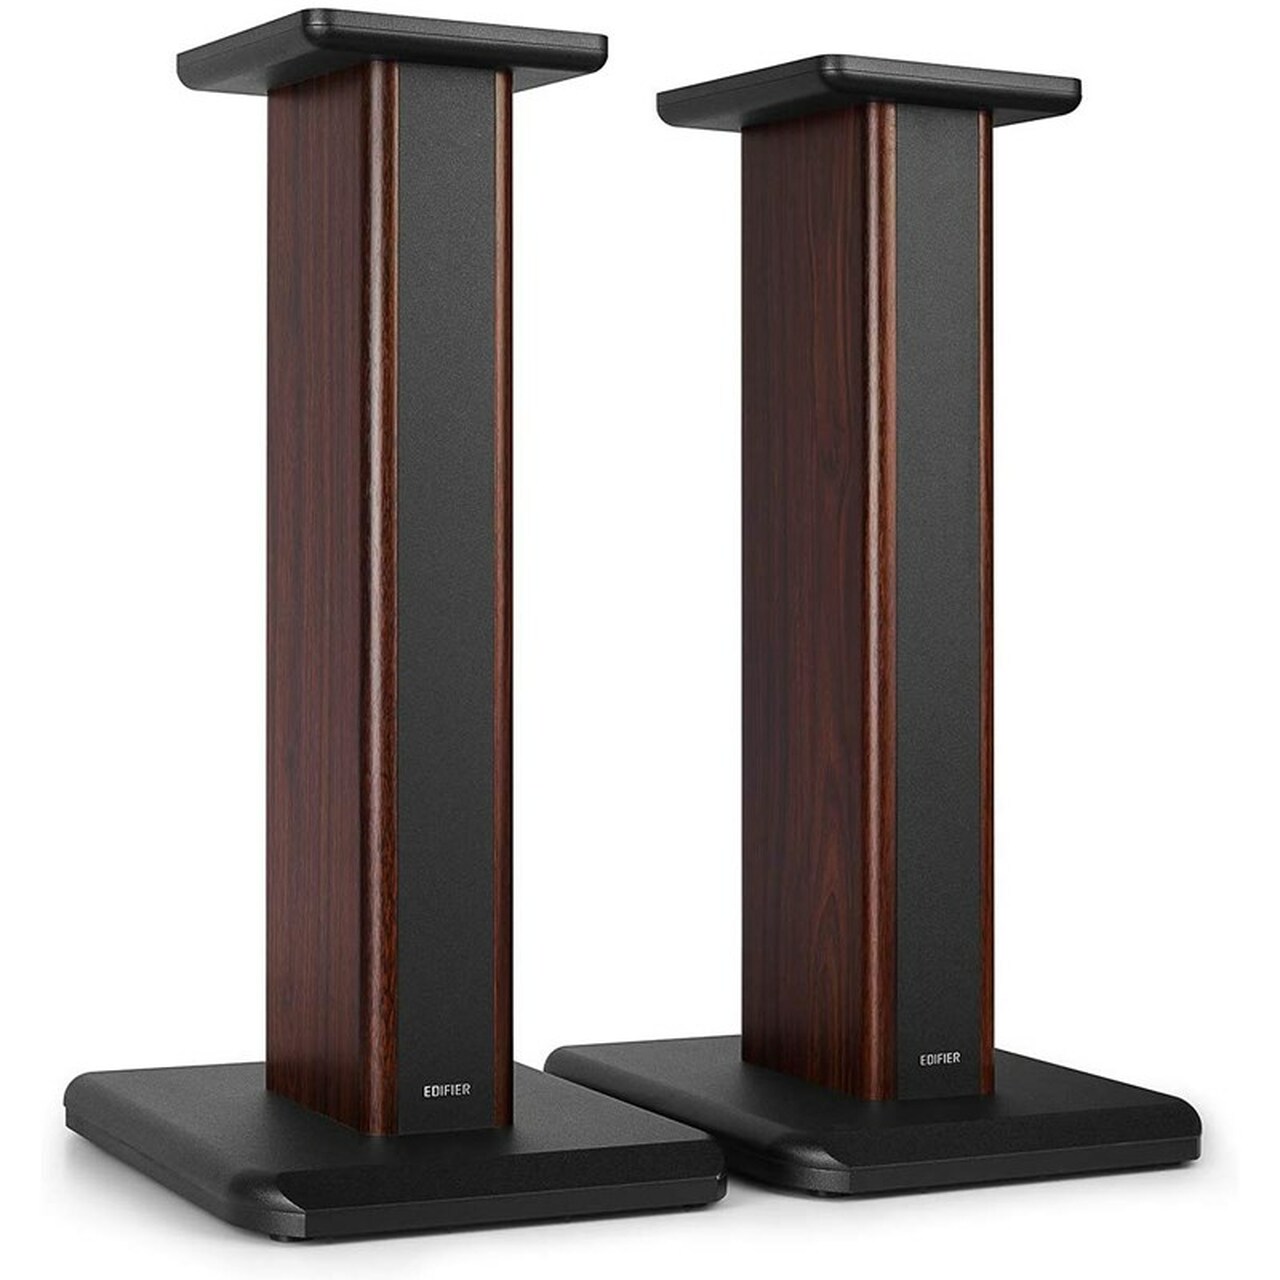 Edifier, SS03, Stand, -, Compatible, with, S3000PRO/Elevates, Speakers/Wood, Grain, Design/MDF, Structure, Stability;, 2, Stand, 